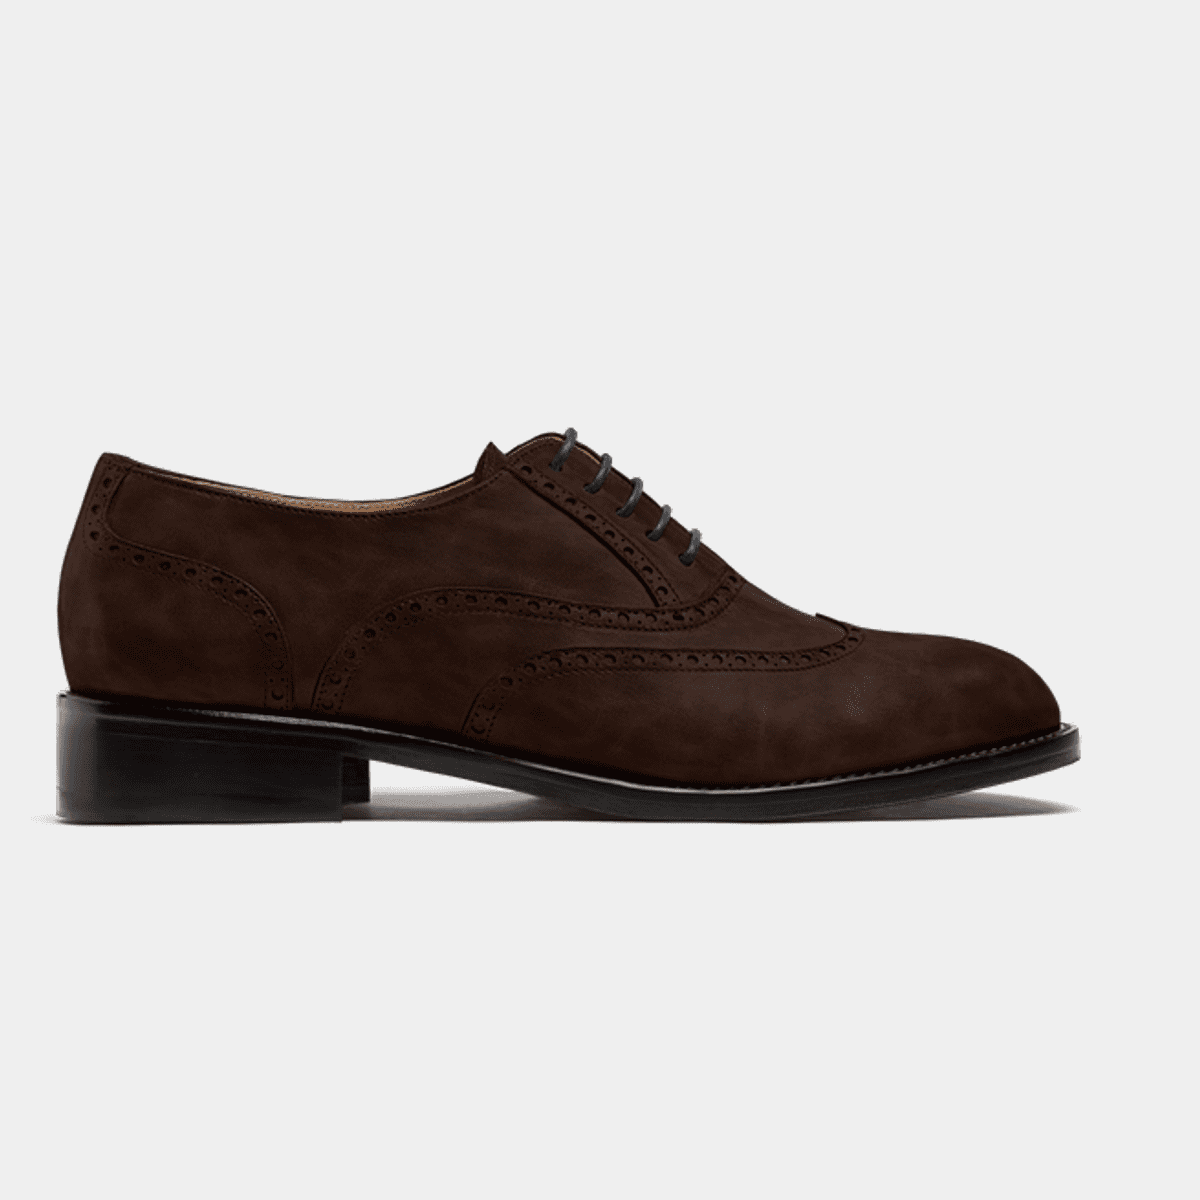 Full Brogue shoes - brown country | Sumissura